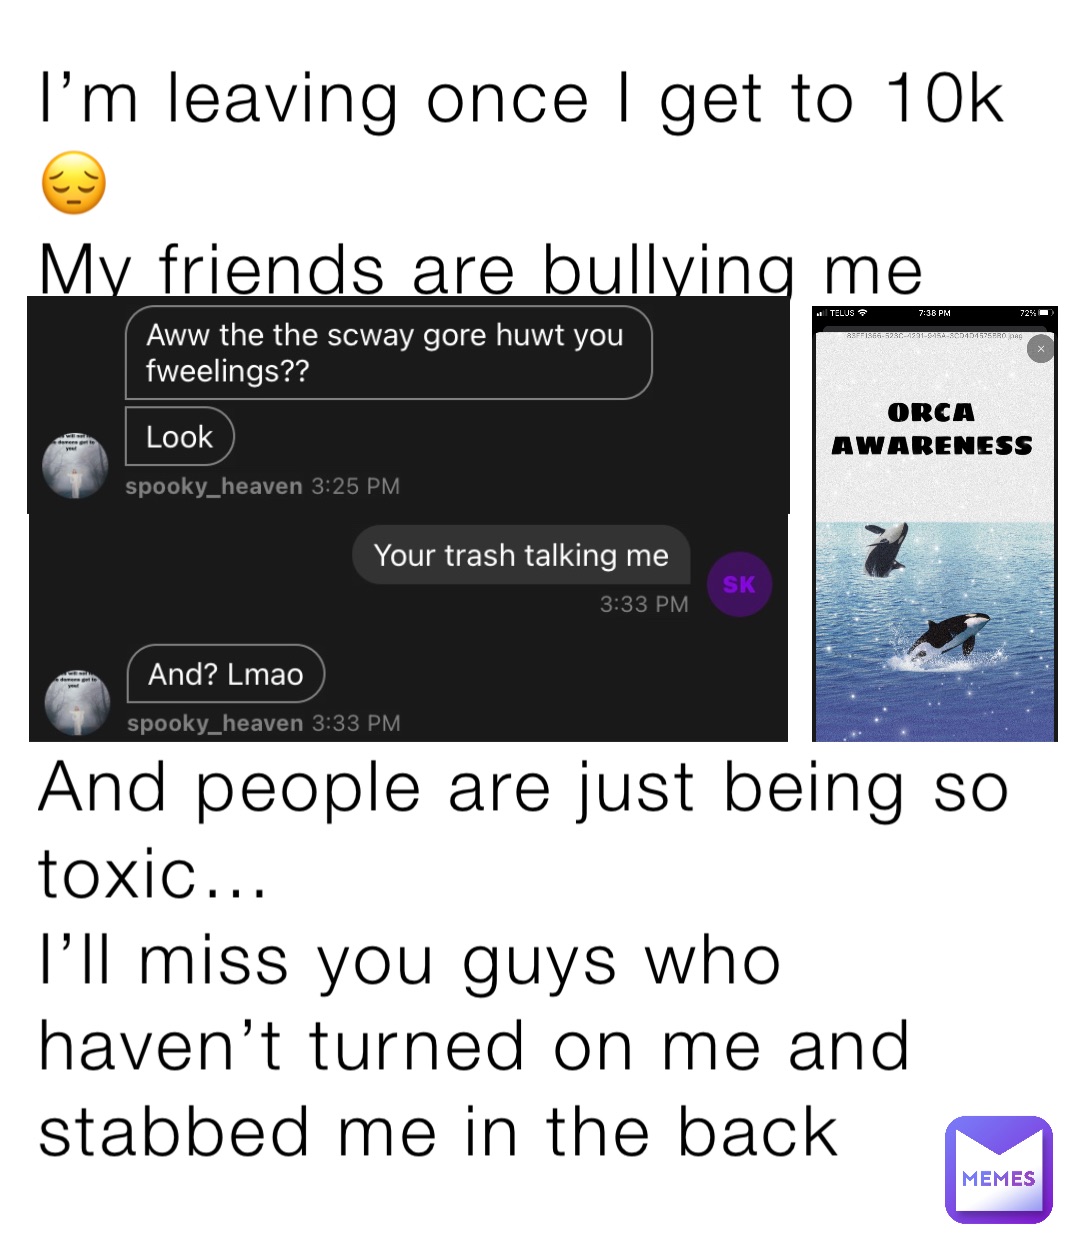 I’m leaving once I get to 10k 😔
My friends are bullying me





And people are just being so toxic… 
I’ll miss you guys who haven’t turned on me and stabbed me in the back